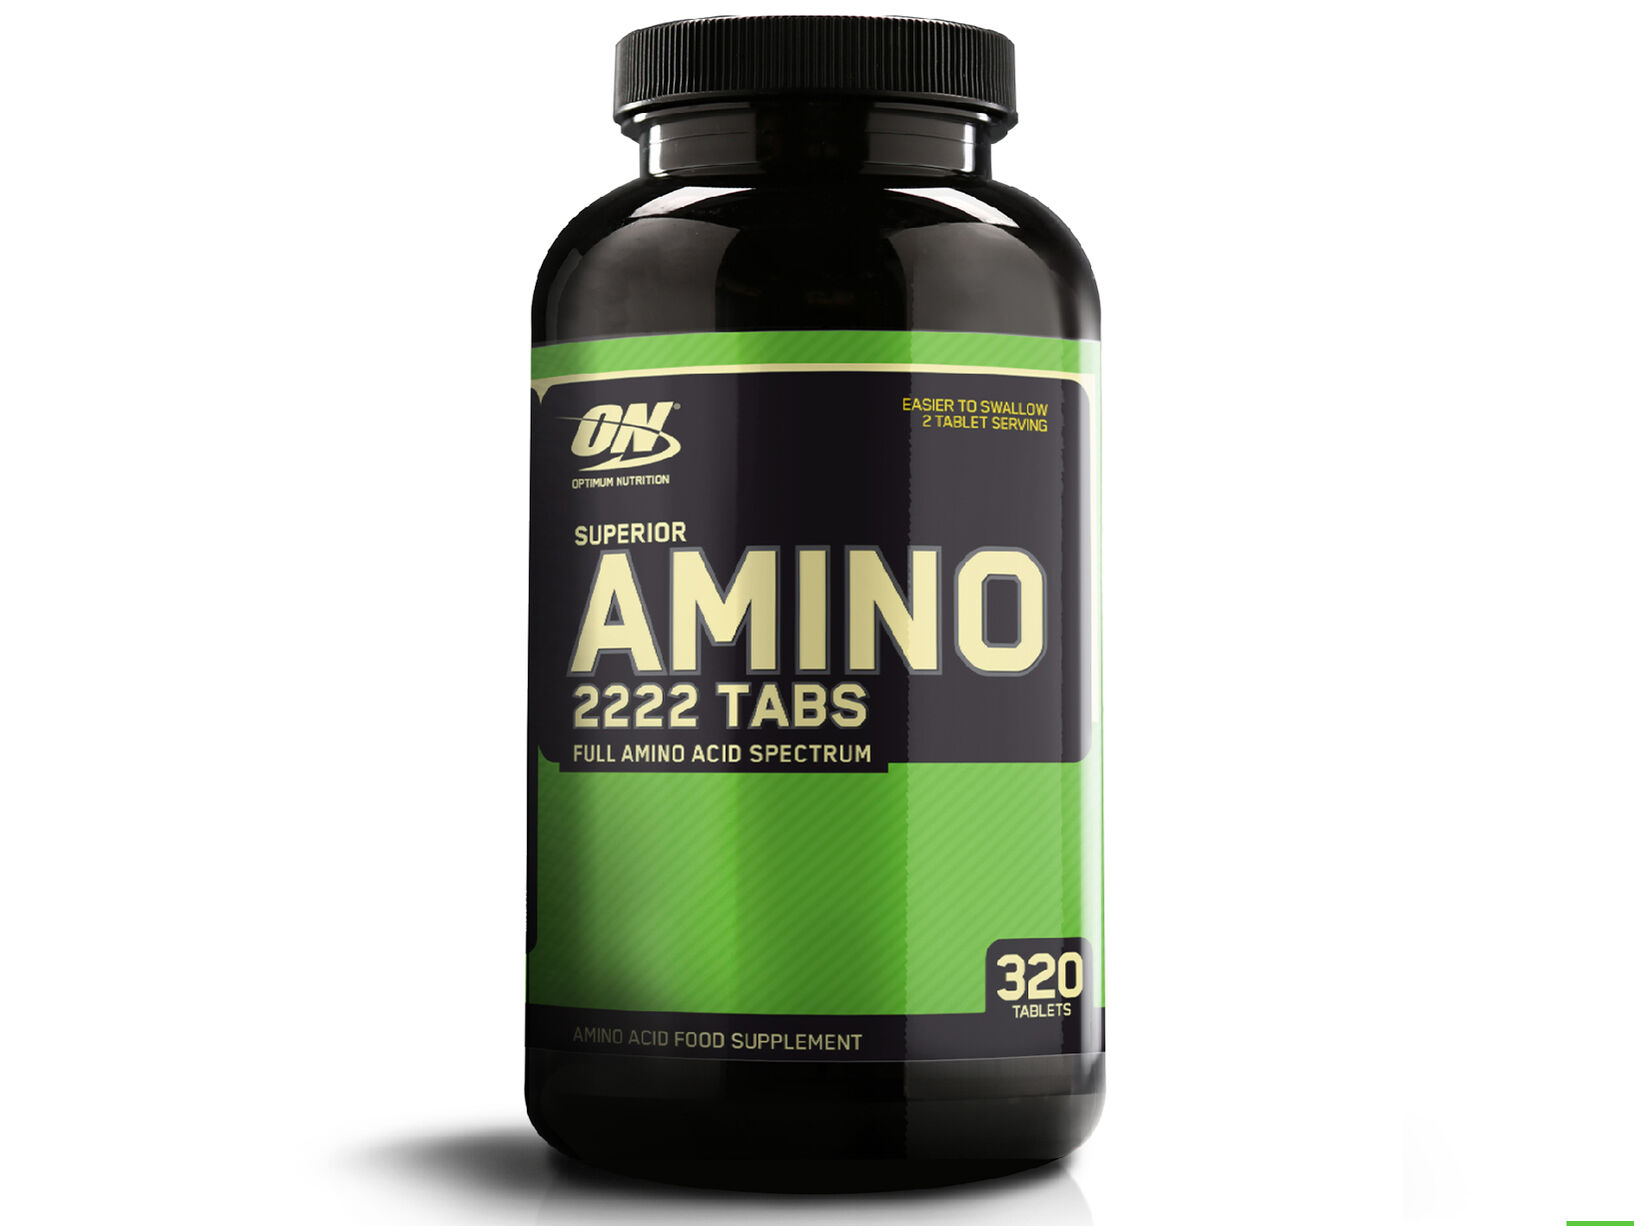 REPACKED: ON AMINO 2222 50TABLETS 100% PURE & AUTHENTIC